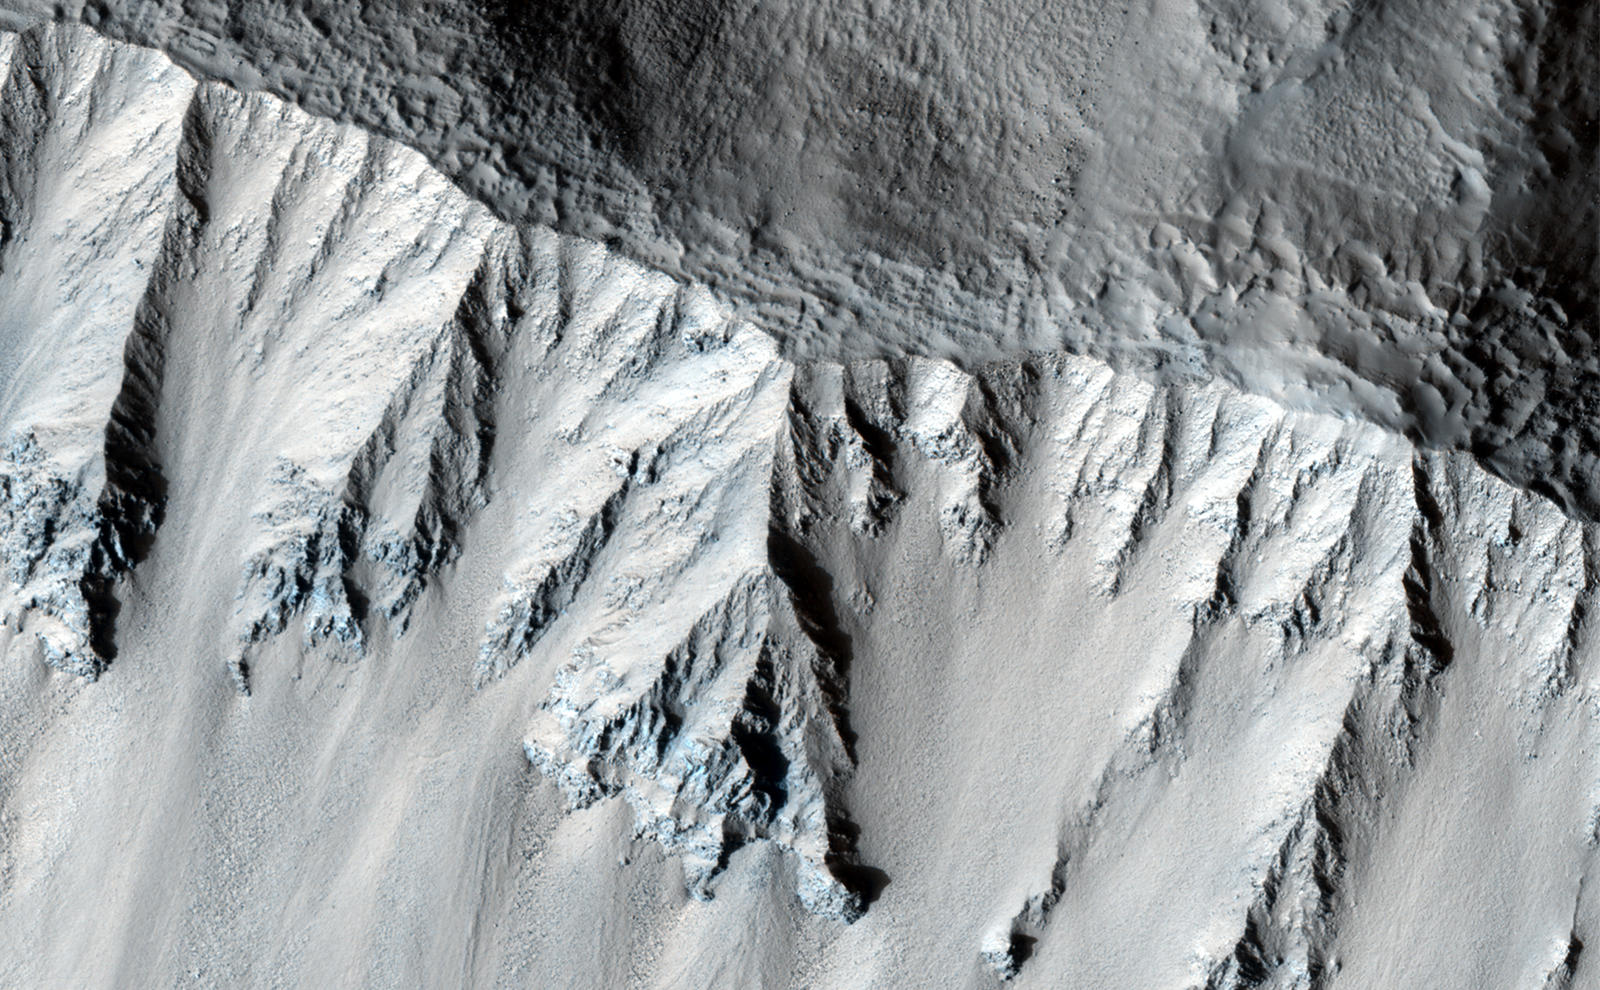 This fresh crater is located in the northern mid-latitudes. It is designated as fresh because of its very sharp rim.The crater has experienced some modification since it formed, including a few tiny craters on the south wall.The rough texture of the floor is suggestive of ground ice, which is expected to exist in the mid-latitudes. Ground ice aids gravity in moving material from the crater walls towards the center. Material is visible slumping off the northwest crater wall in this fashion. The wavy texture of the center of the crater floor suggests that material has been transported from the walls and merged in the center.